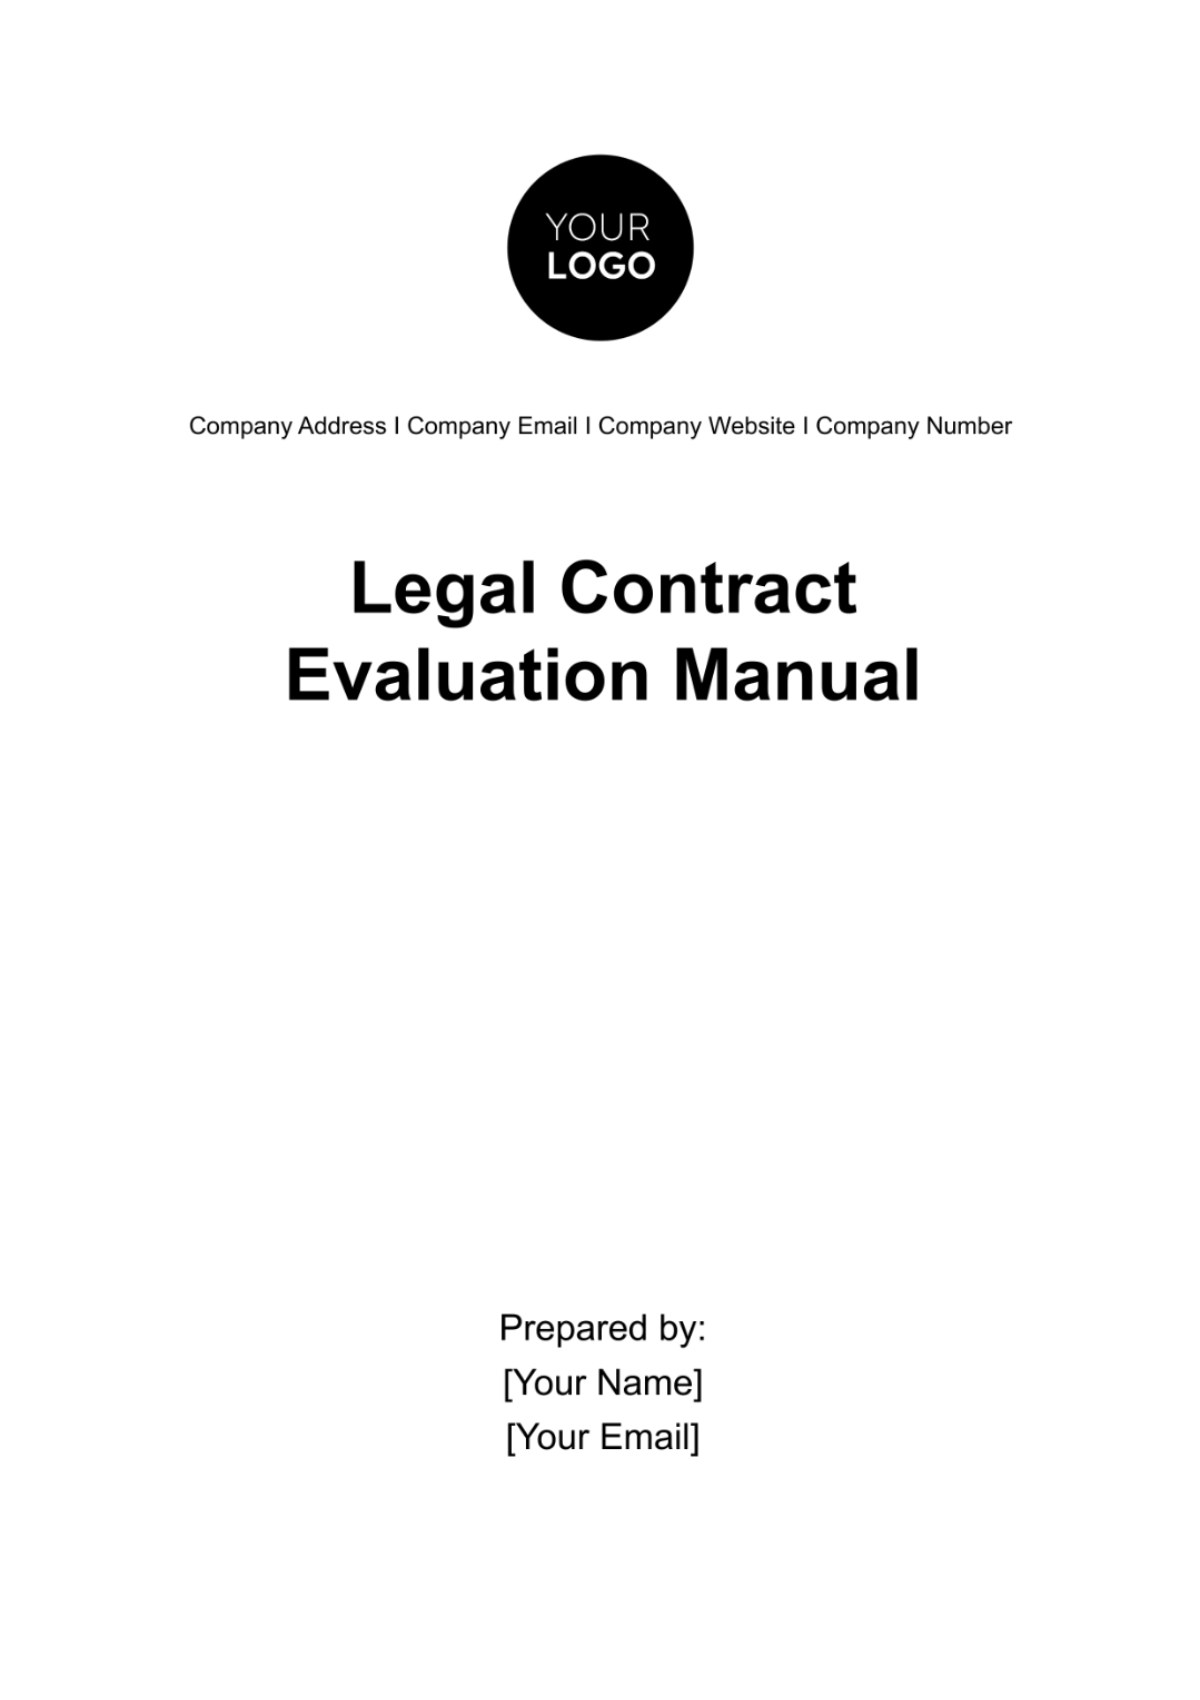 Legal Contract Evaluation Manual Template